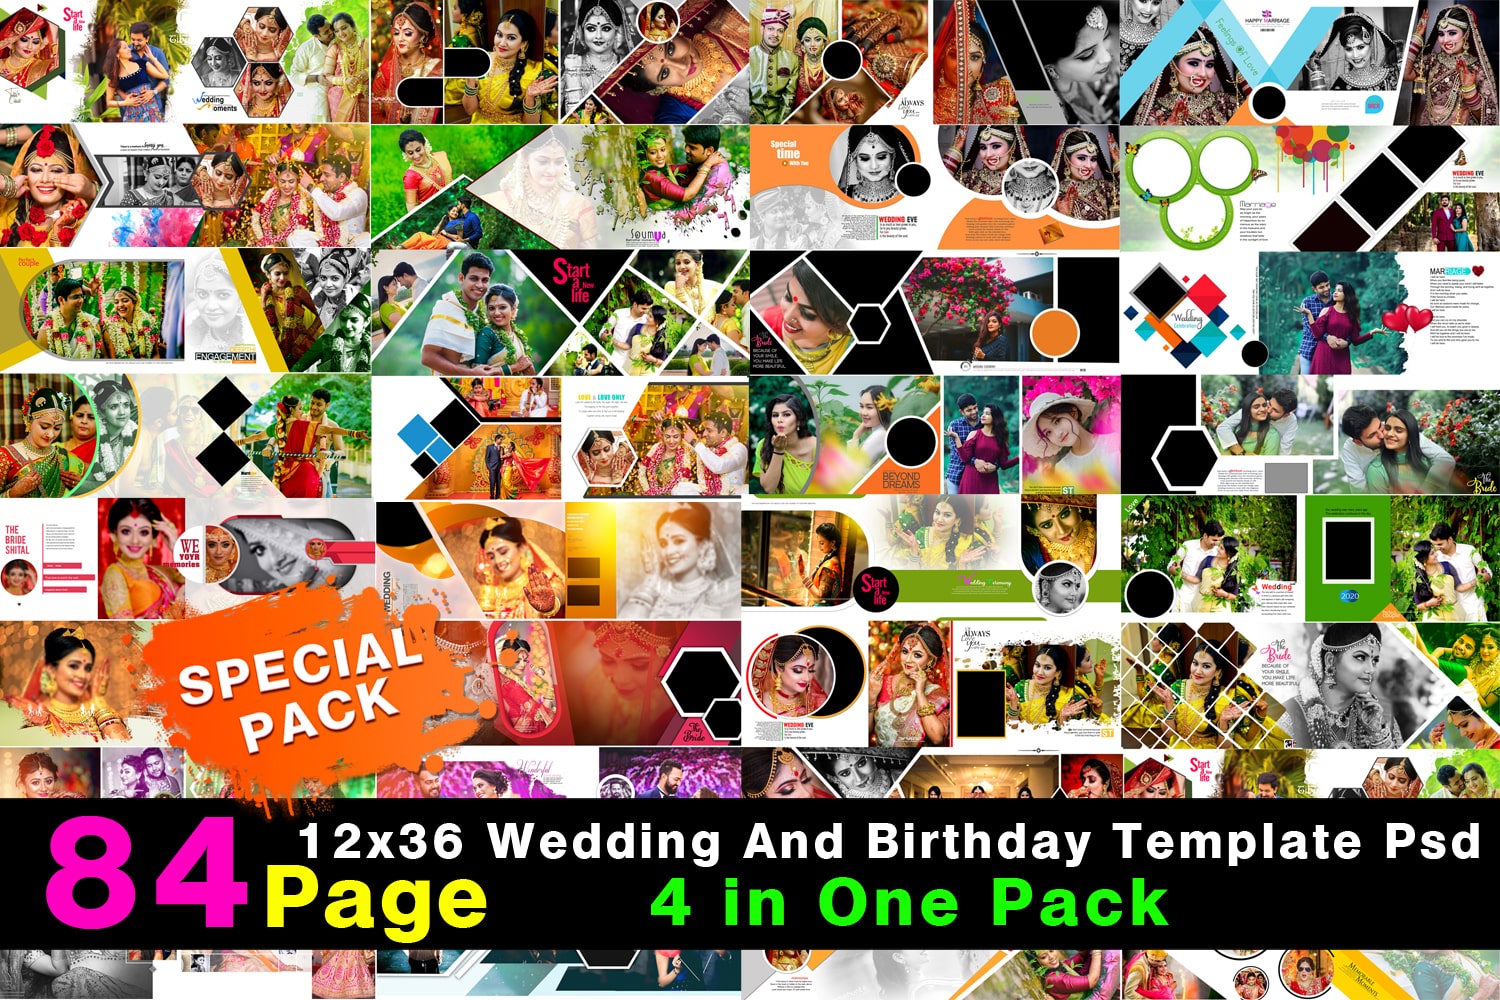 Pack8=Wedding And Birthday Album Template Psd 2021-4 in One Pack (84 Page)  – Eodia